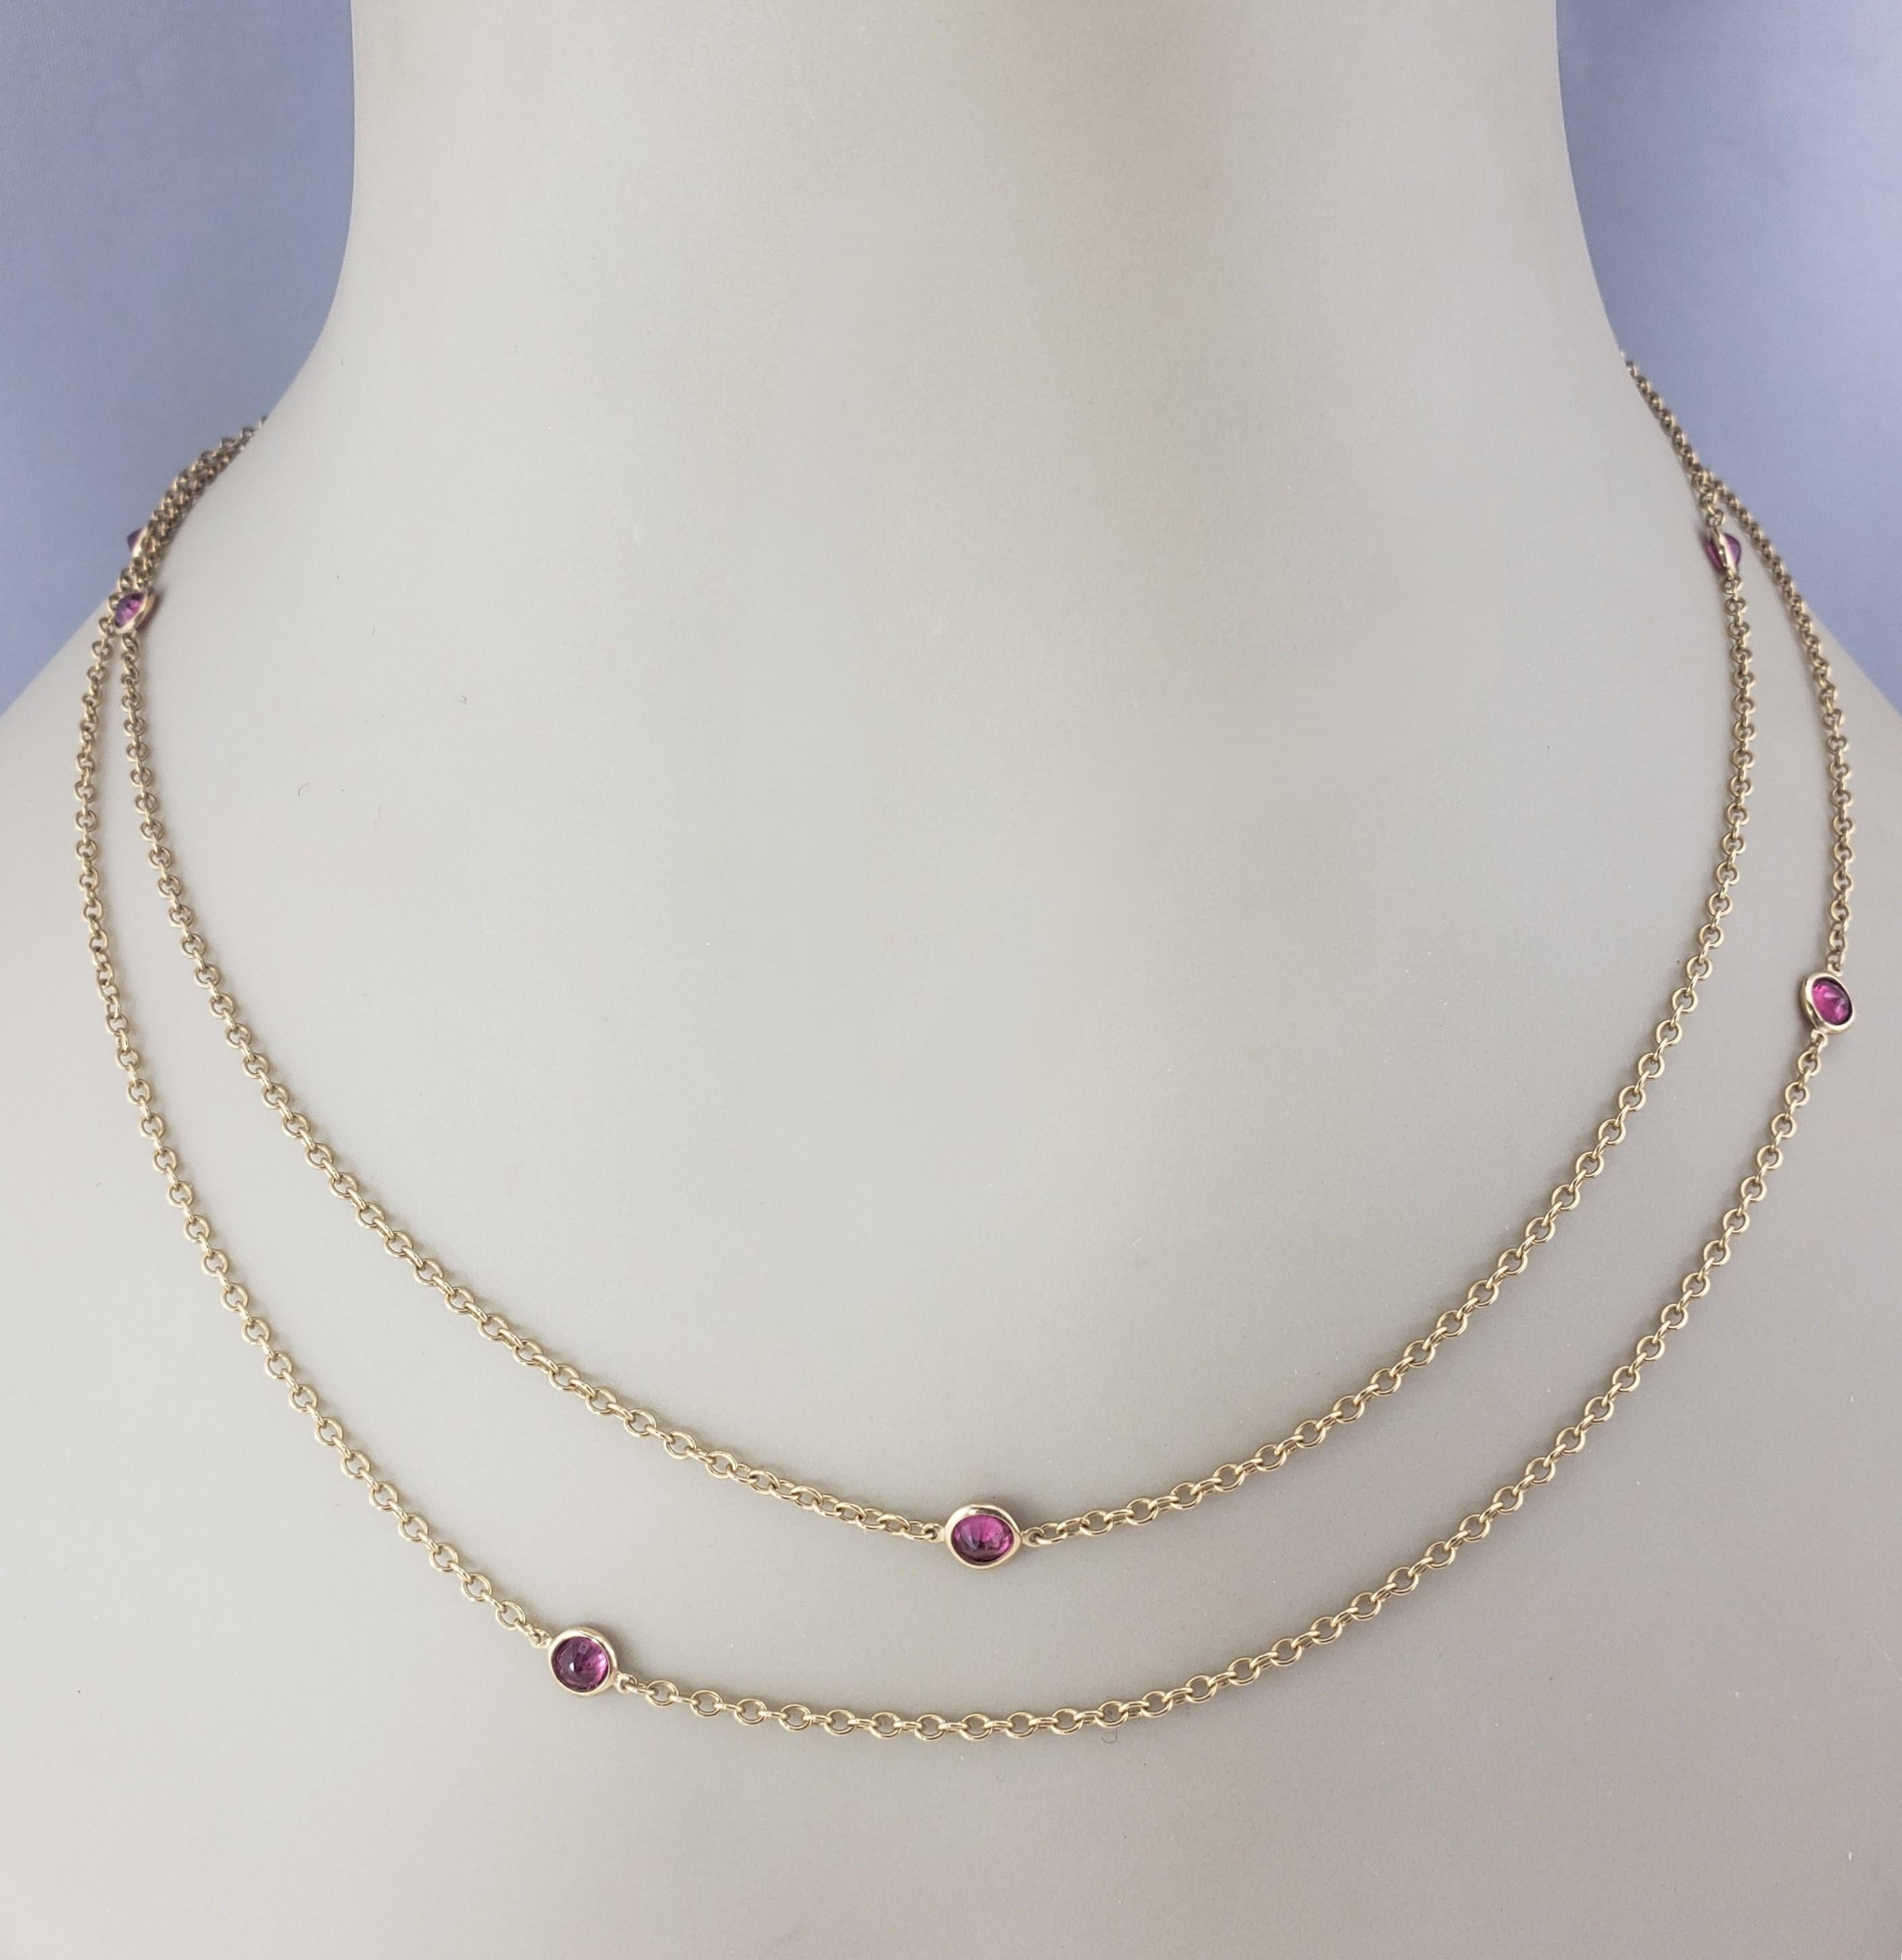 Tiffany & Co. 18K Gold Elsa Peretti Color by the Yard Ruby Necklace #17225 For Sale 2